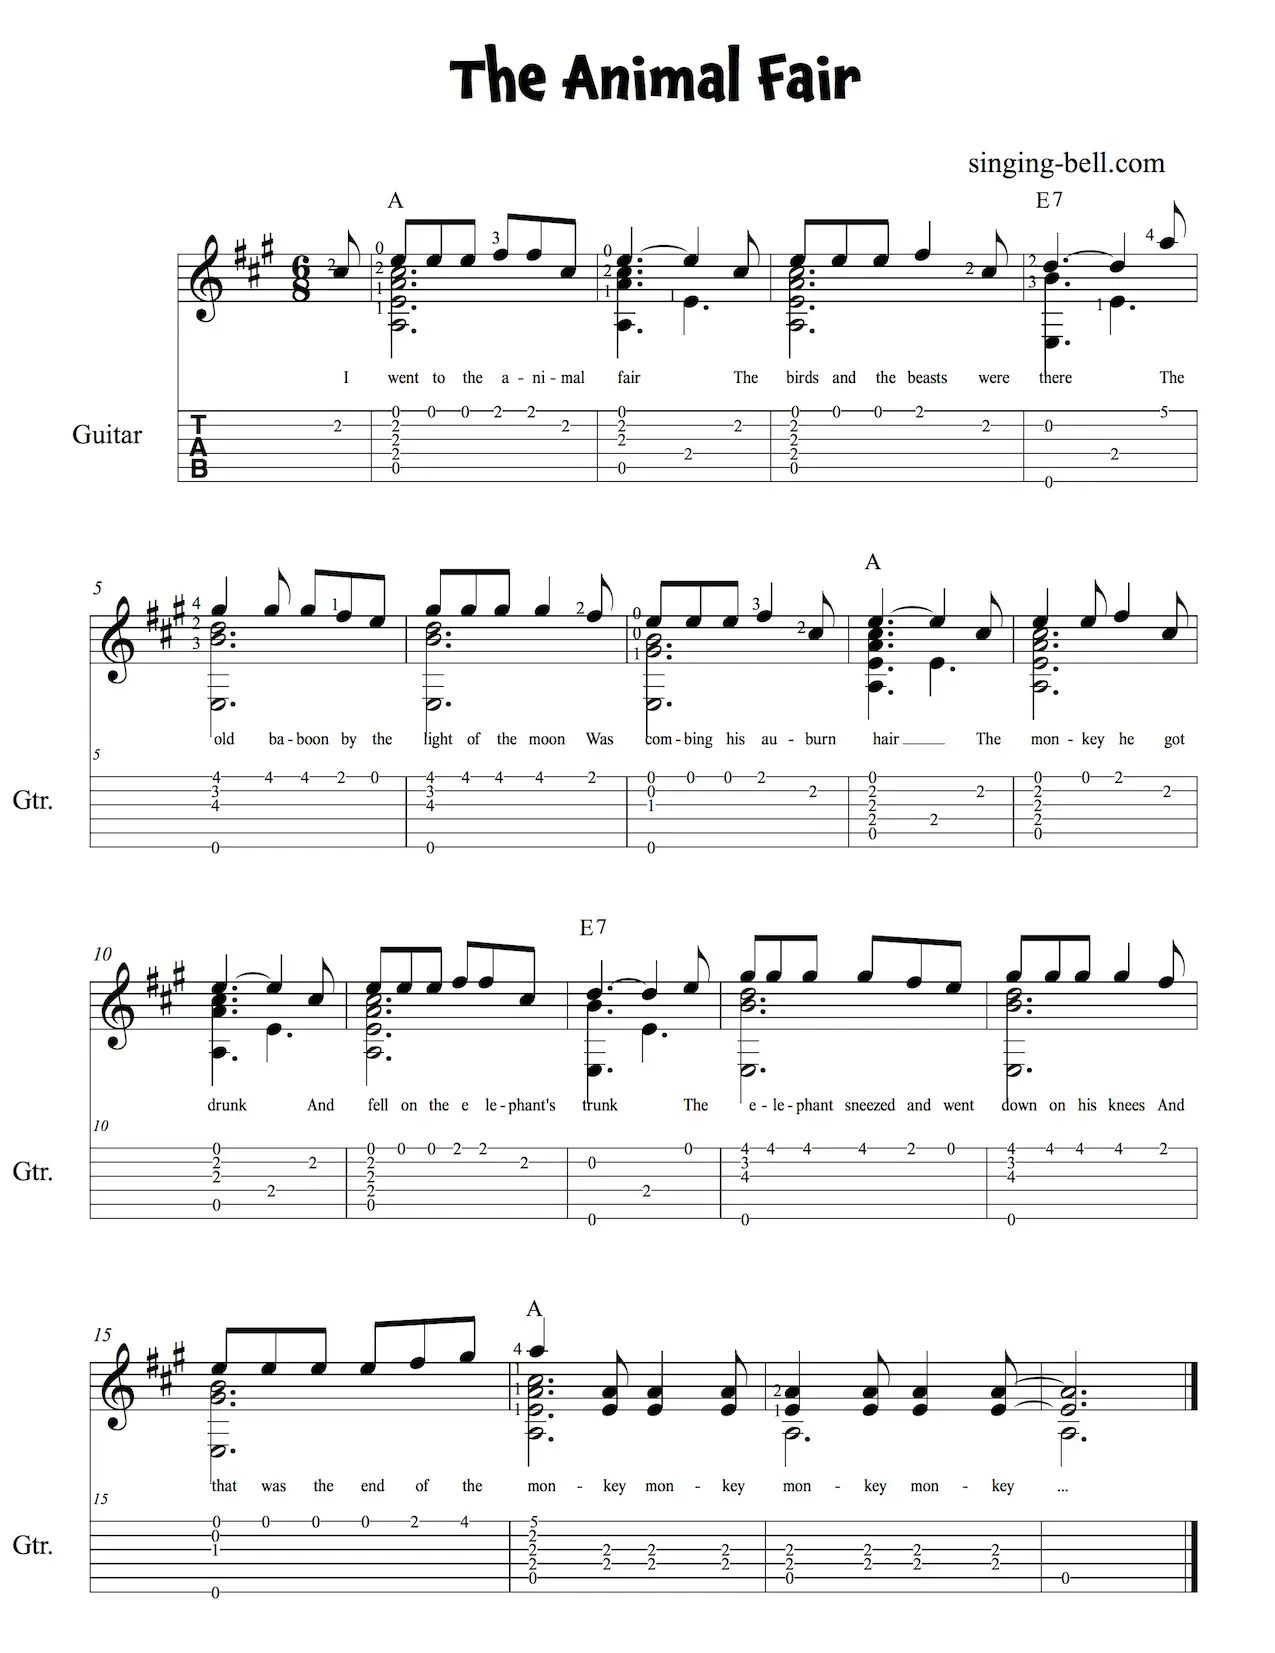 The Animal Fair Easy Guitar Sheet Music with Notes and Tablature.